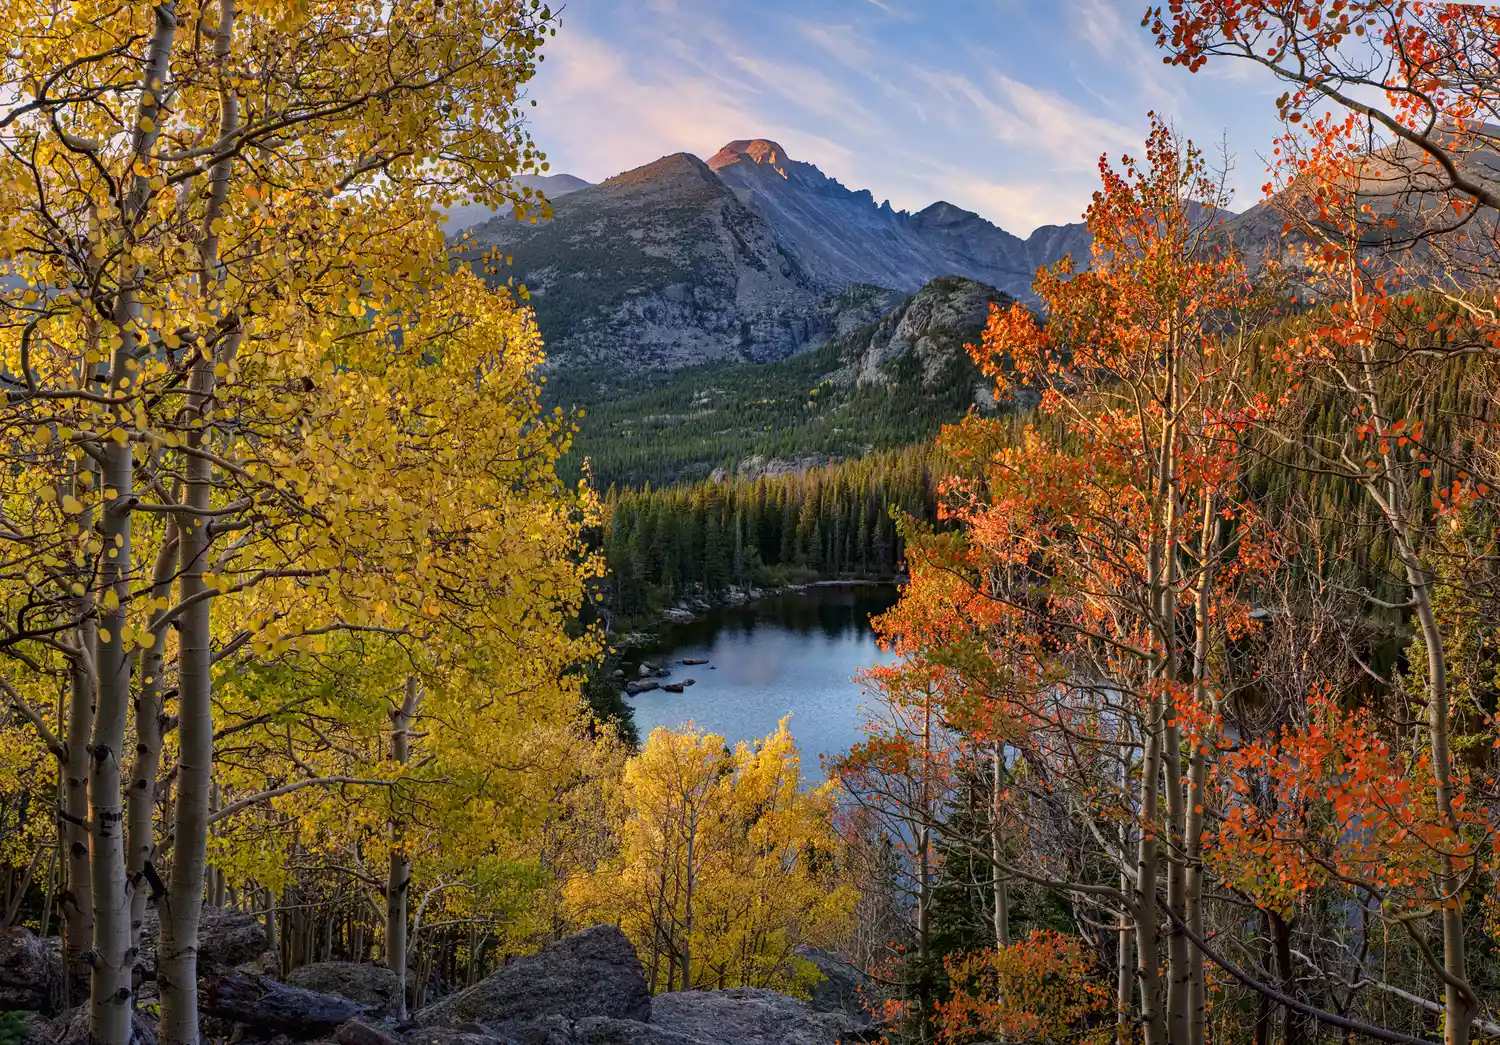 Fall foliage overlooking a lake and mountains at Rocky Mountain National Park in Colorado.